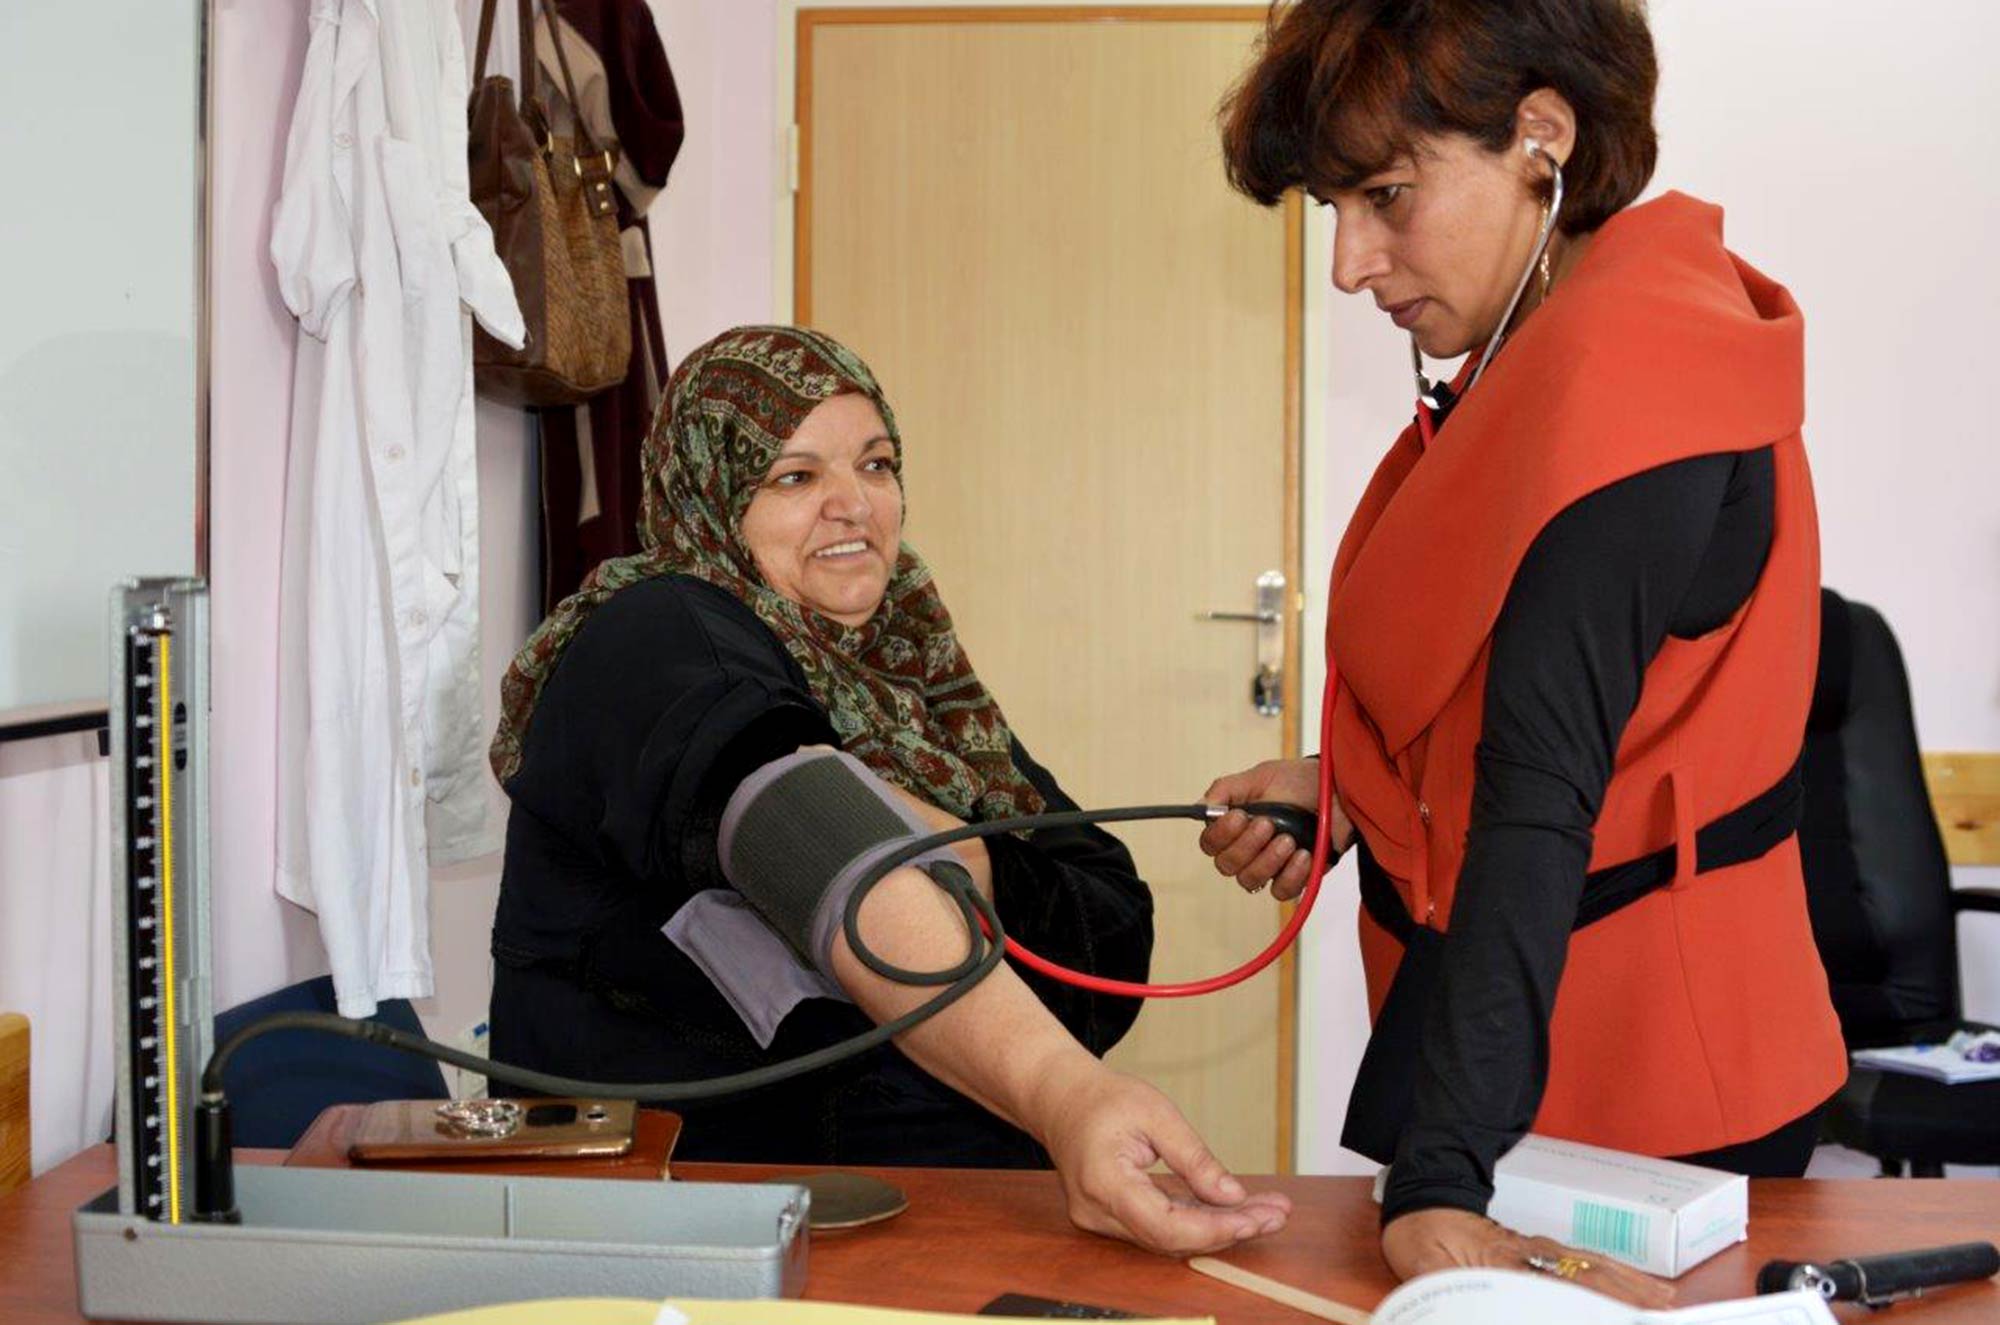 “I’ve been working for 16 years and only now can I say I have the opportunity to make a difference,” says Dr. Fathiya of the new clinic in Al-Walajeh. Siham, her patient, is equally enthusiastic: “I can finally get treated in a clinic near my home.” Previously she had to take two buses to get to a clinic. “When I think back to the days when it took forever for the bus to arrive, I shiver. Thank God that’s all over!”